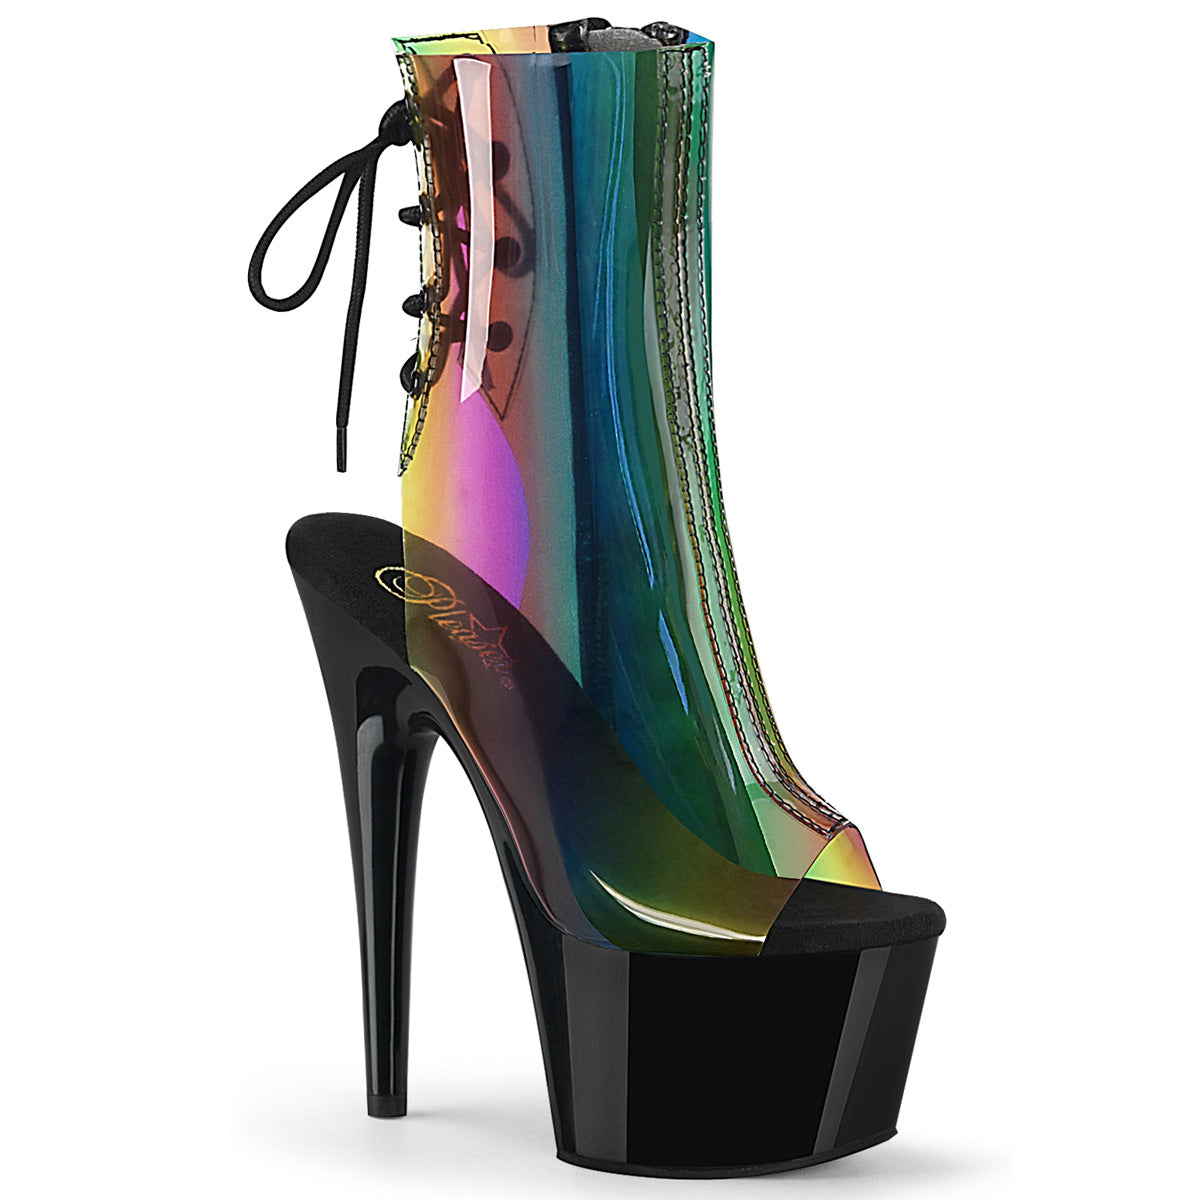 ADORE-1018C-RB Pleaser 7" Heel Rainbow Strippers Ankle Boots-Pleaser- Sexy Shoes